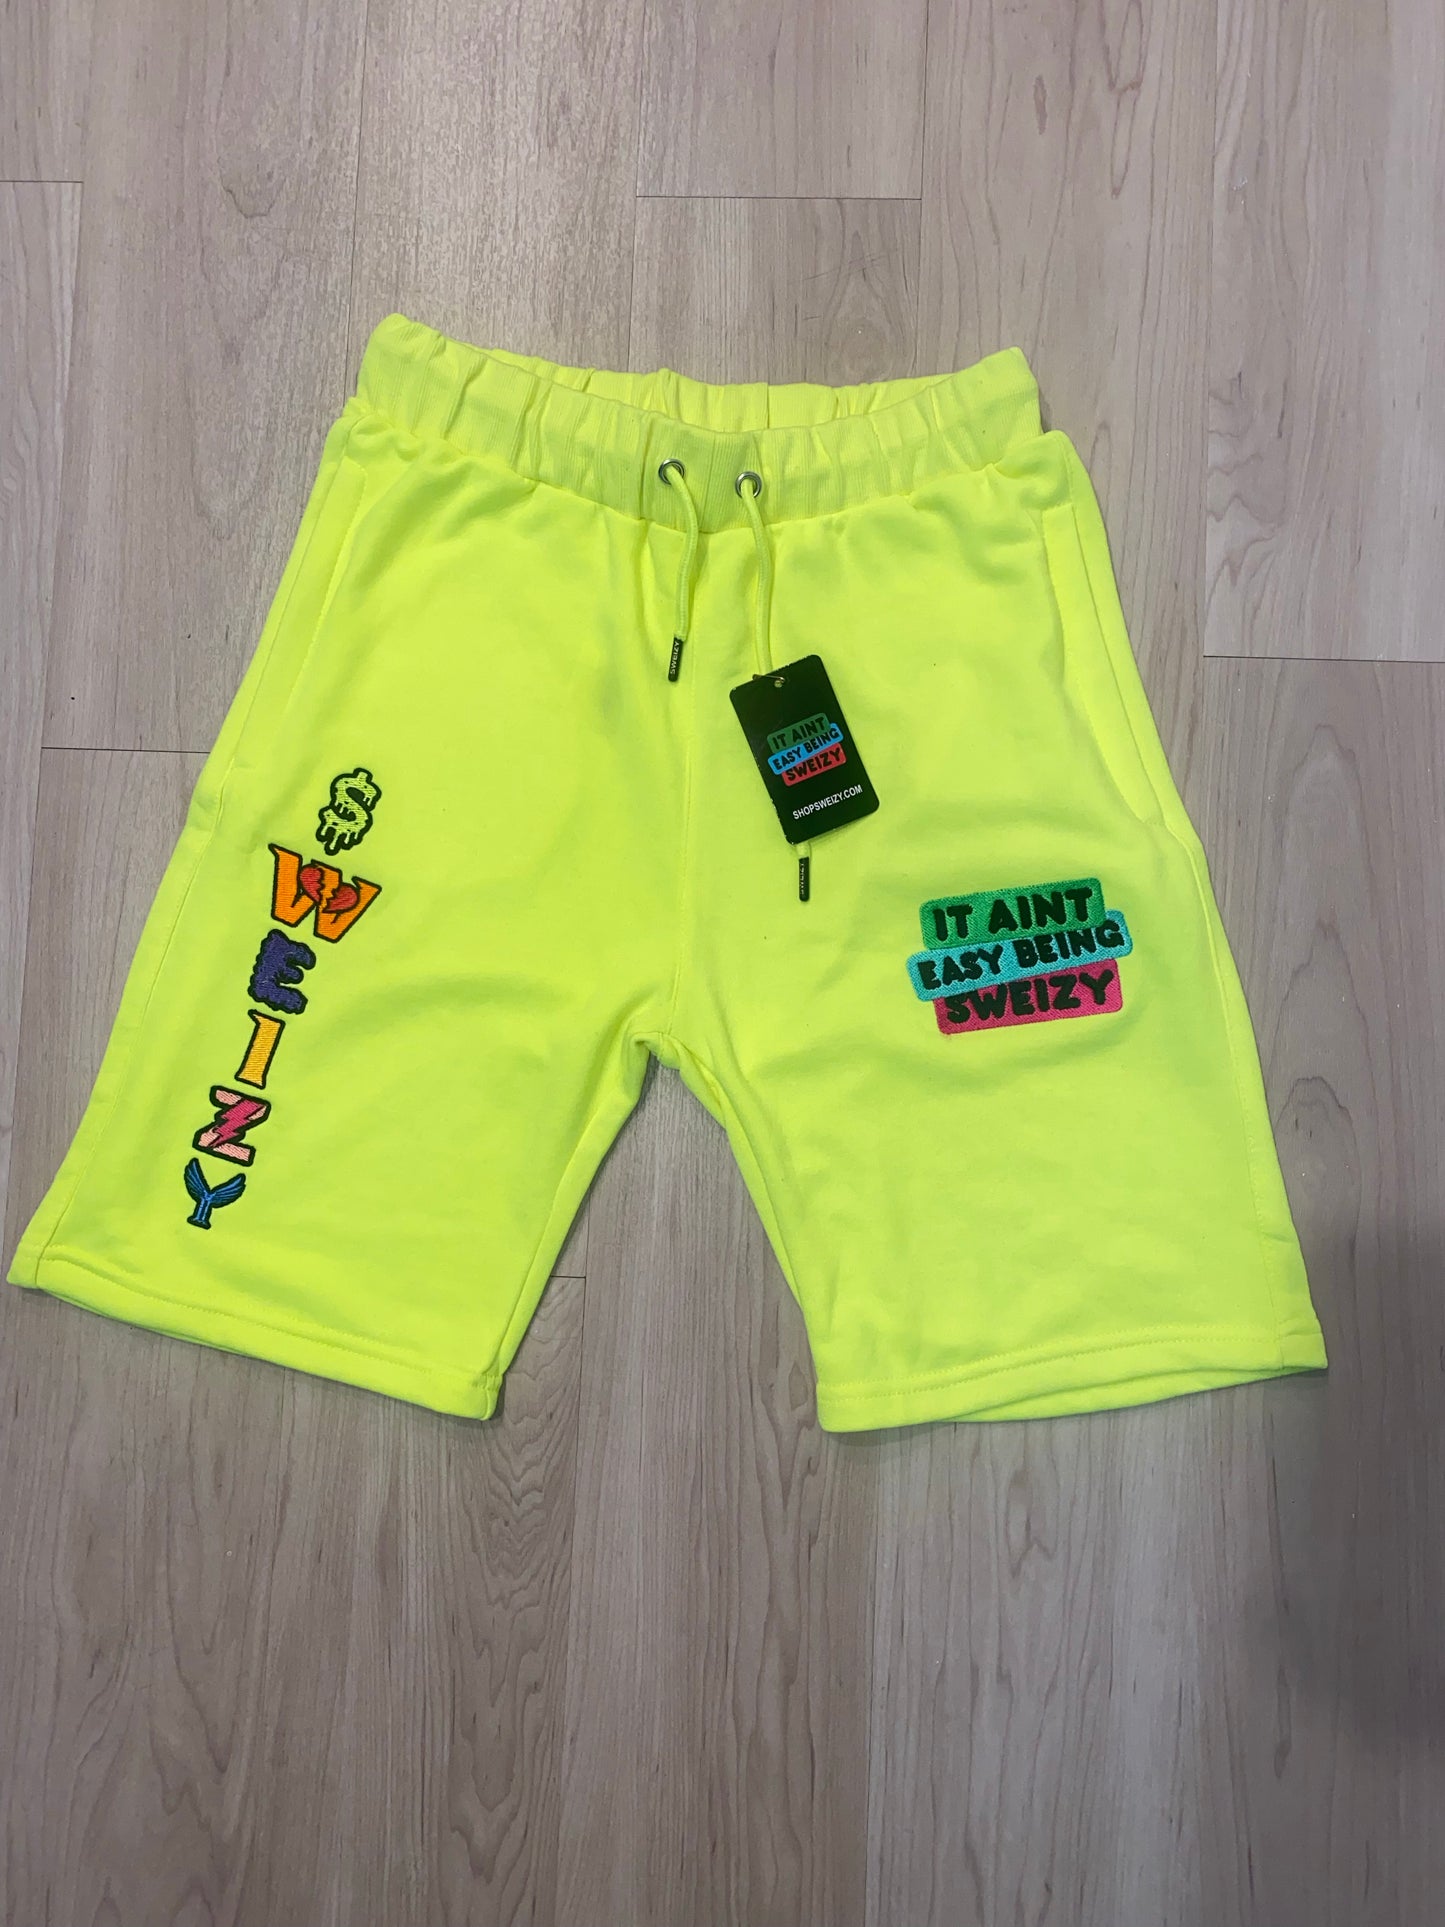 LIME GREEN SHORTS